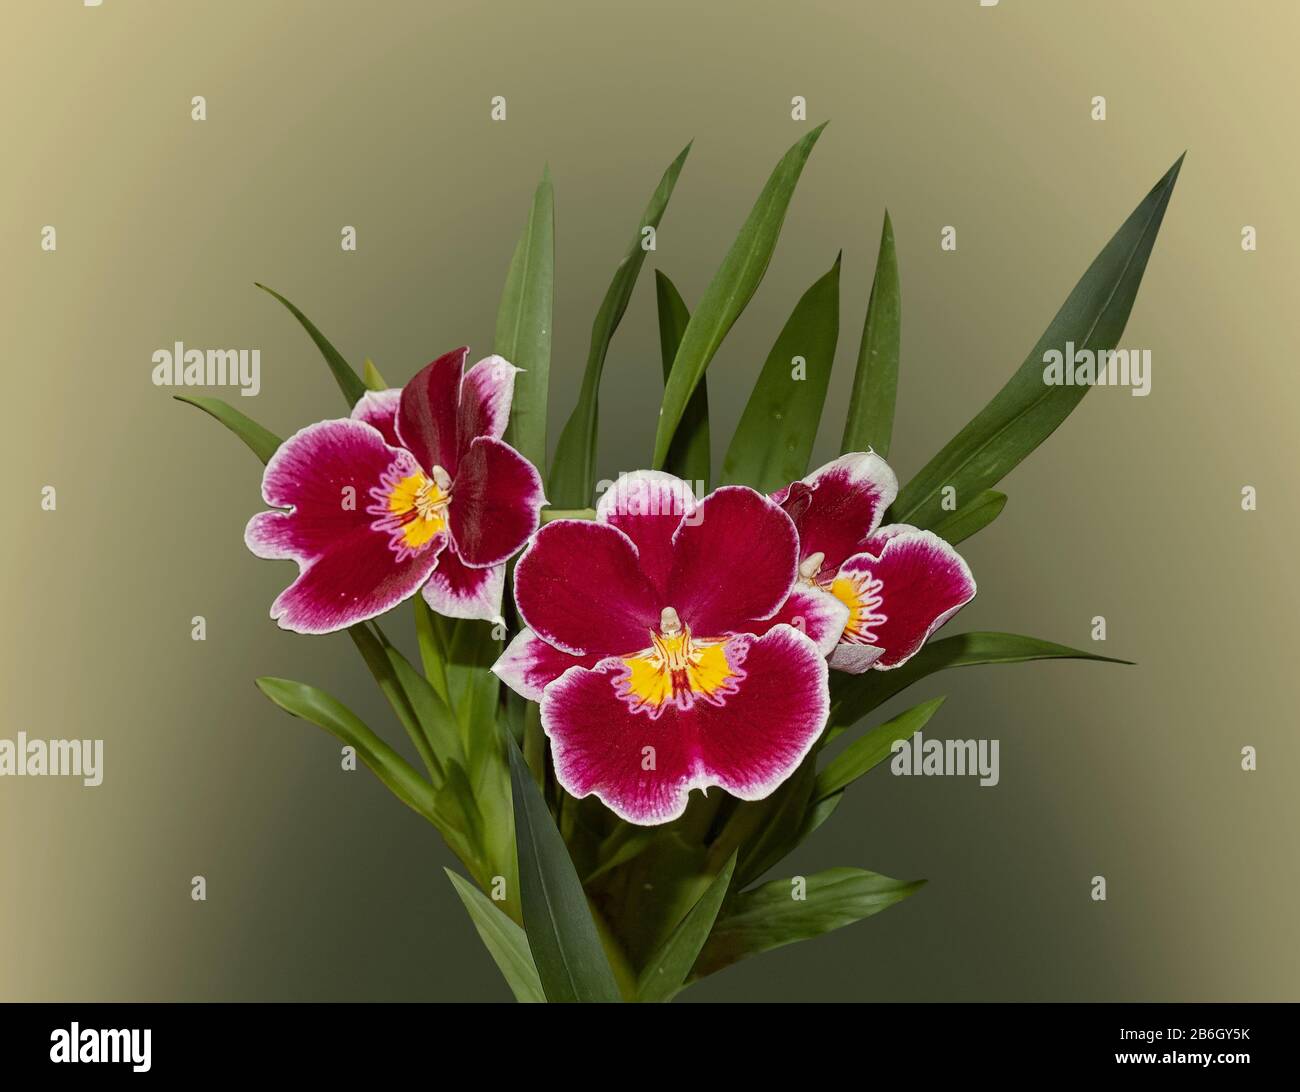 A group of three Miltonia Orchids, pansy orchids. Red orchids with yellow centers and white edges around the petals, isolated on a gradient background Stock Photo